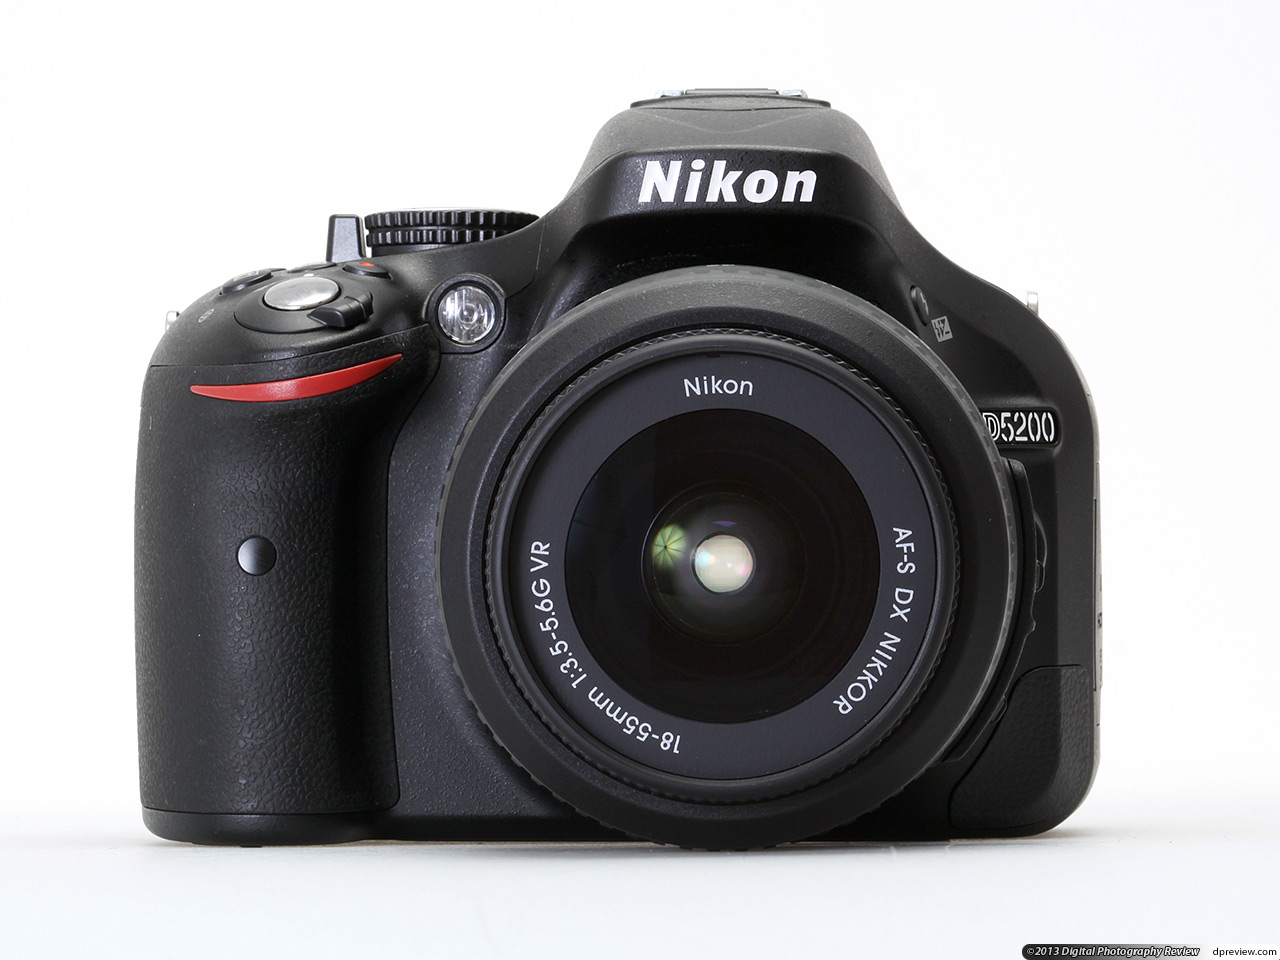 One week with Nikon D5200